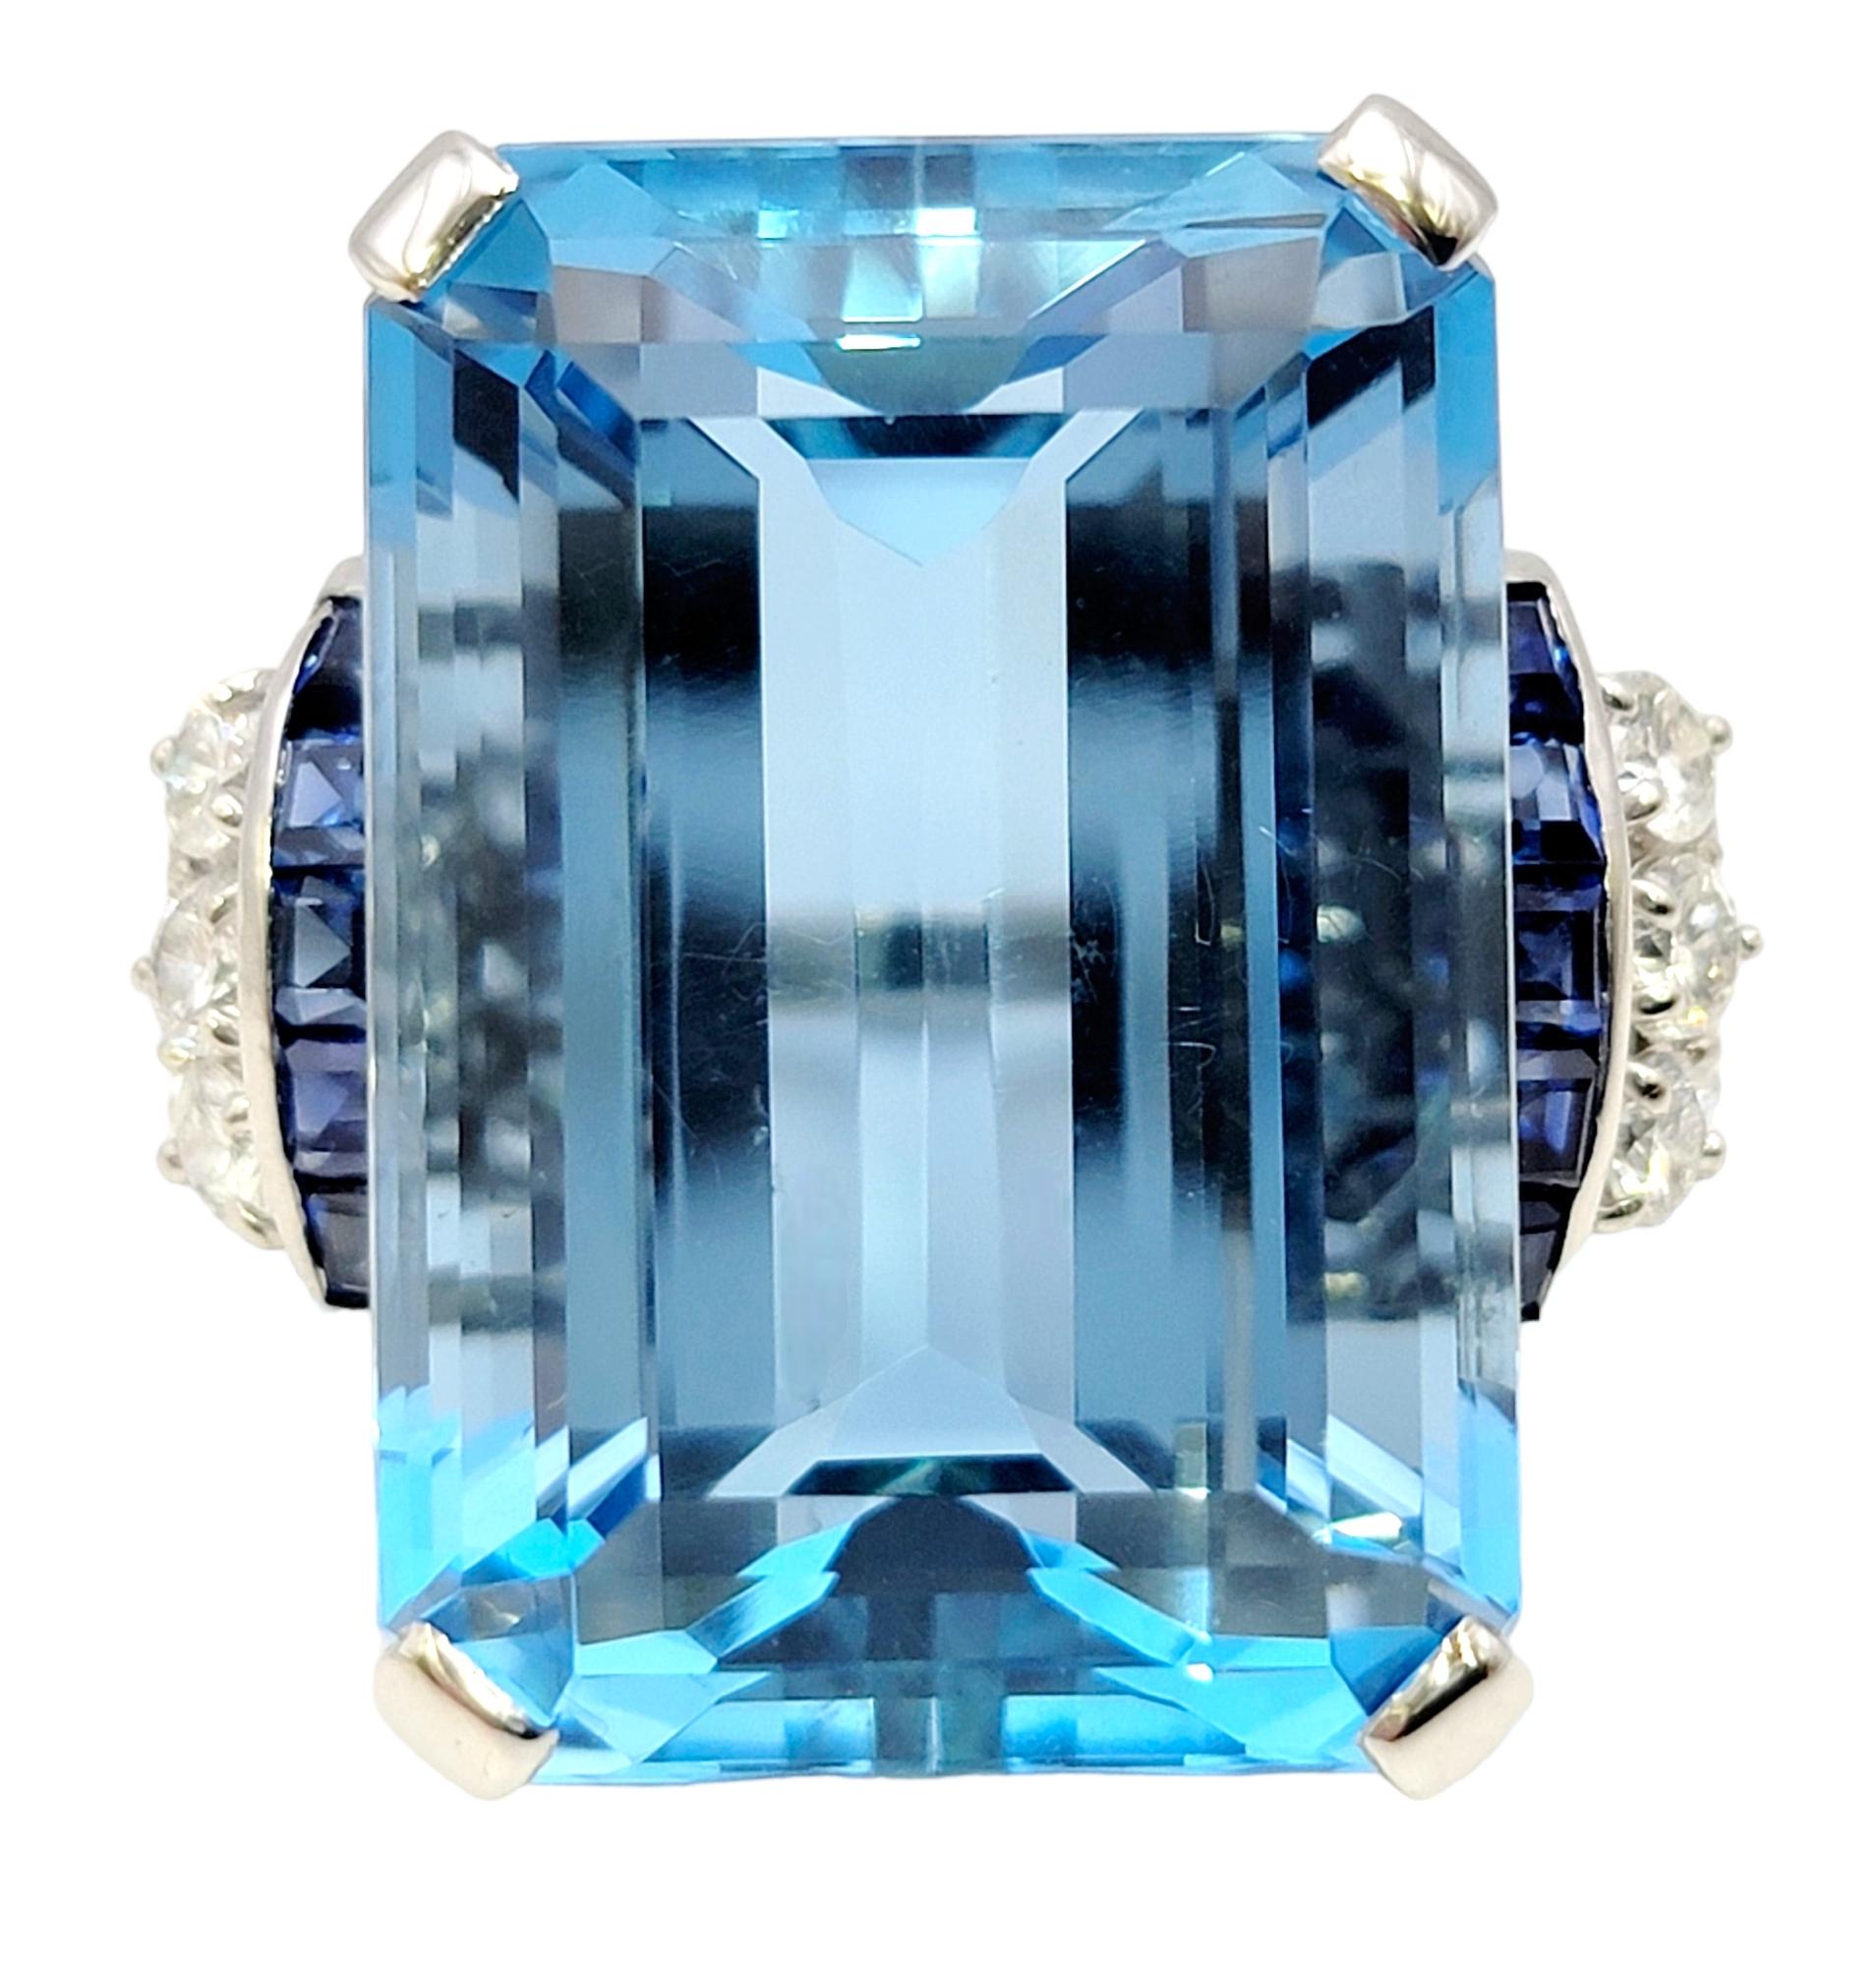 Ring size: 4.5

This ring is an absolute showstopper! The massive aquamarine, sapphire and diamond cocktail ring will fill your finger from end to end with sensational sparkle. It is an absolutely stunning, eye-catching piece that makes a bold